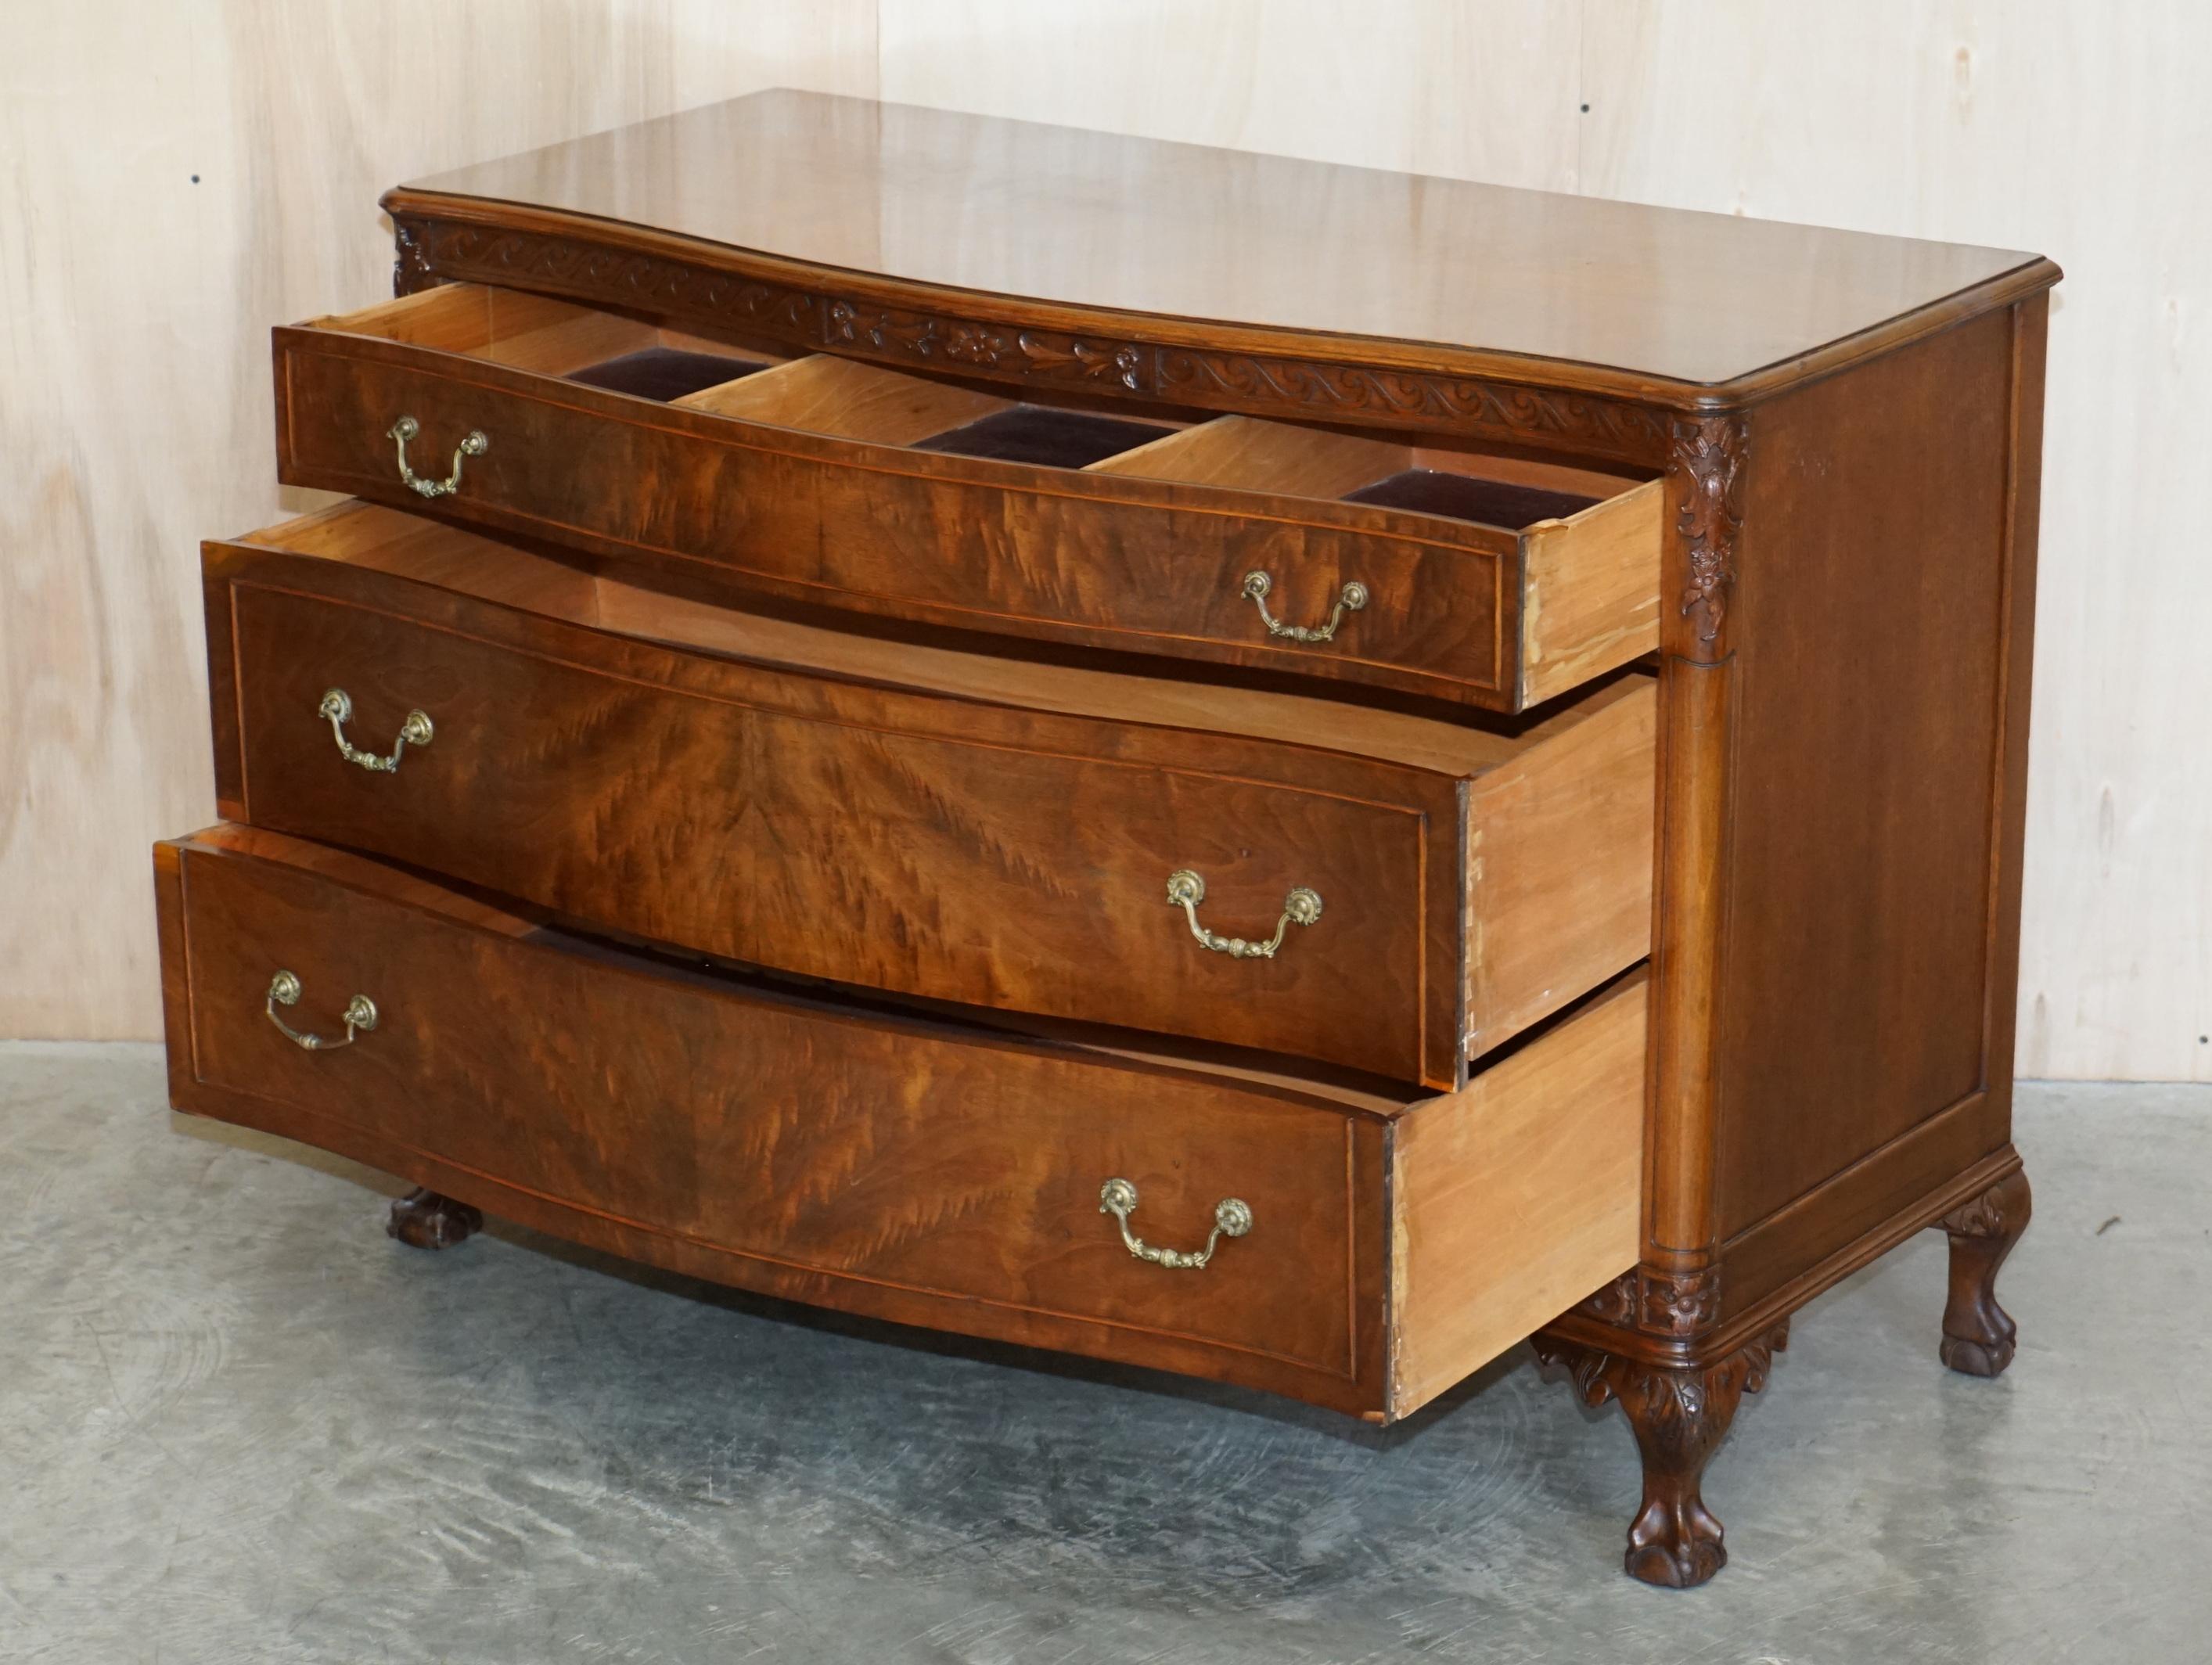 Antique Serpentine Fronted Claw & Ball Feet Flamed Hardwood Chest of Drawers For Sale 10